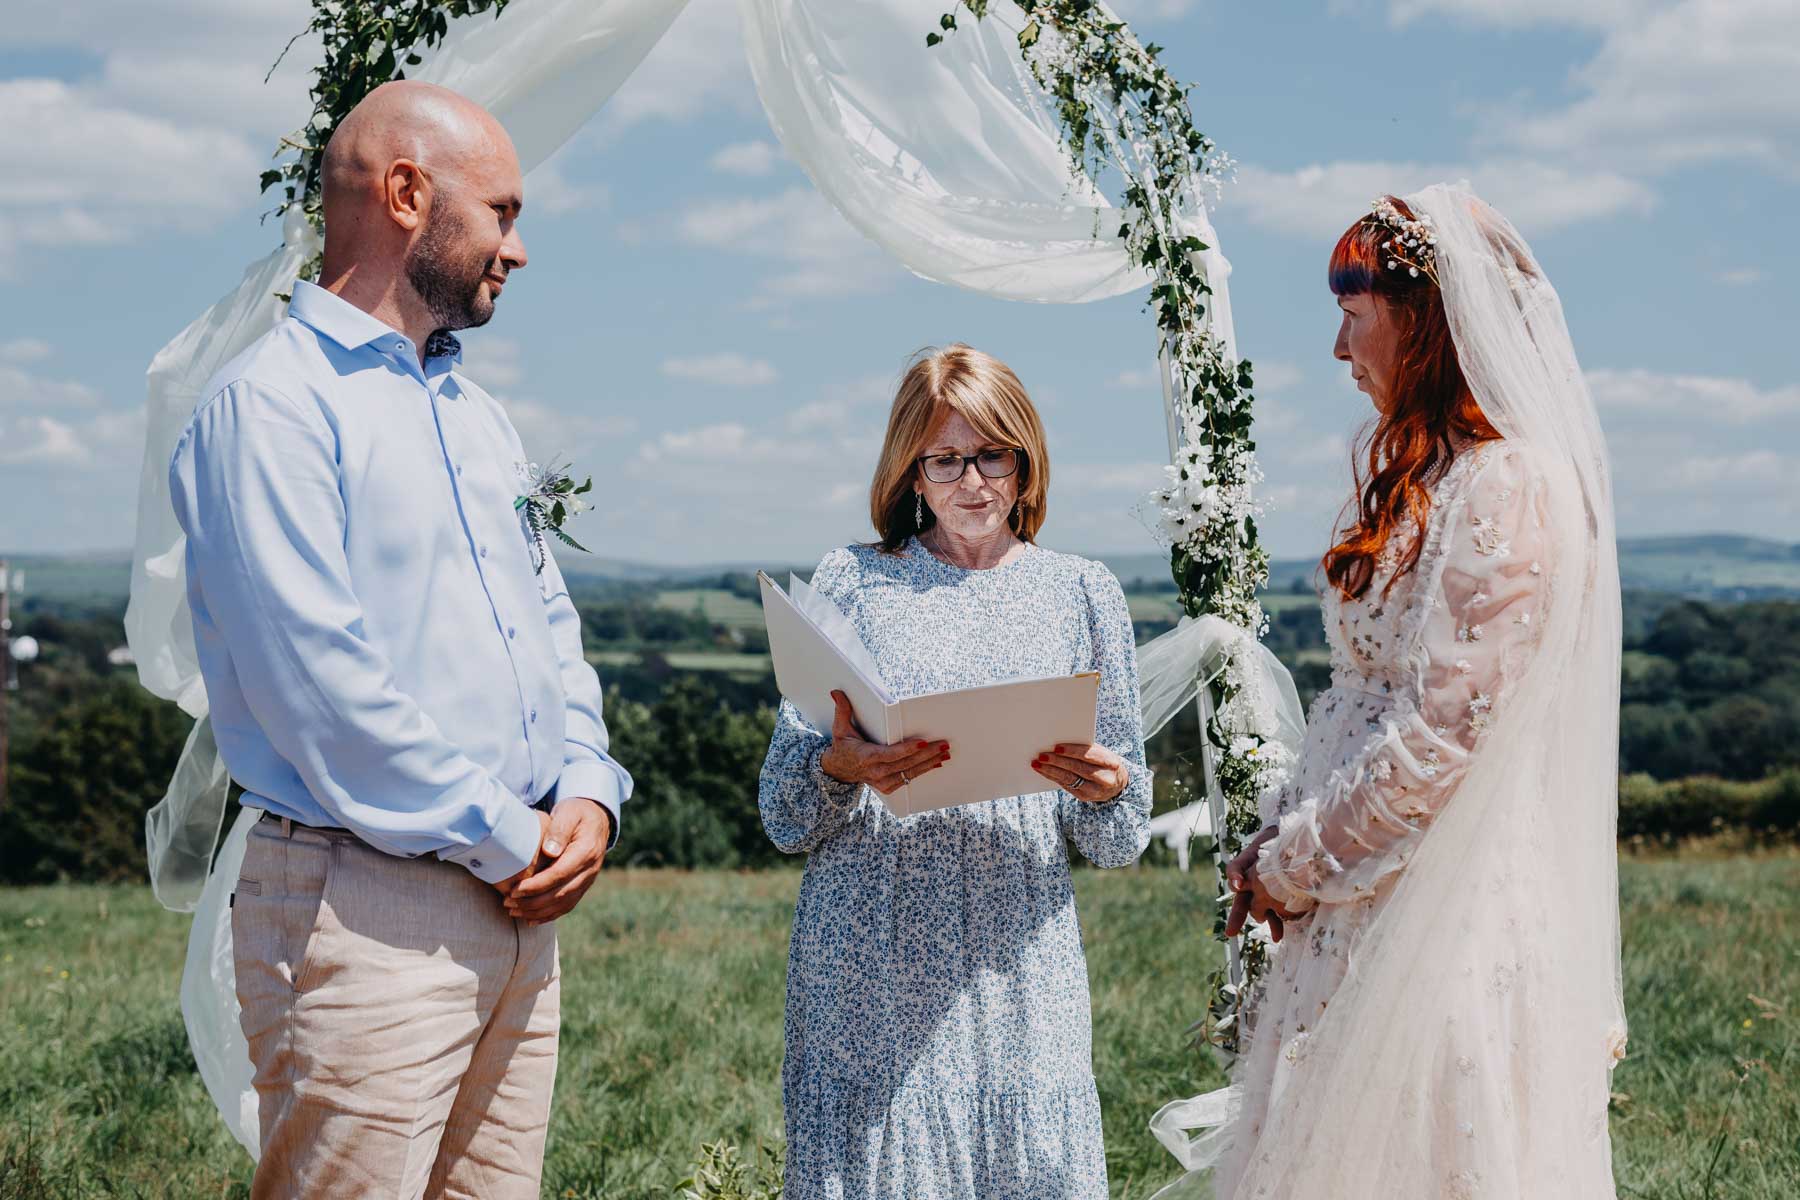 The groom, the bride and their handfasting ceremony celebrant